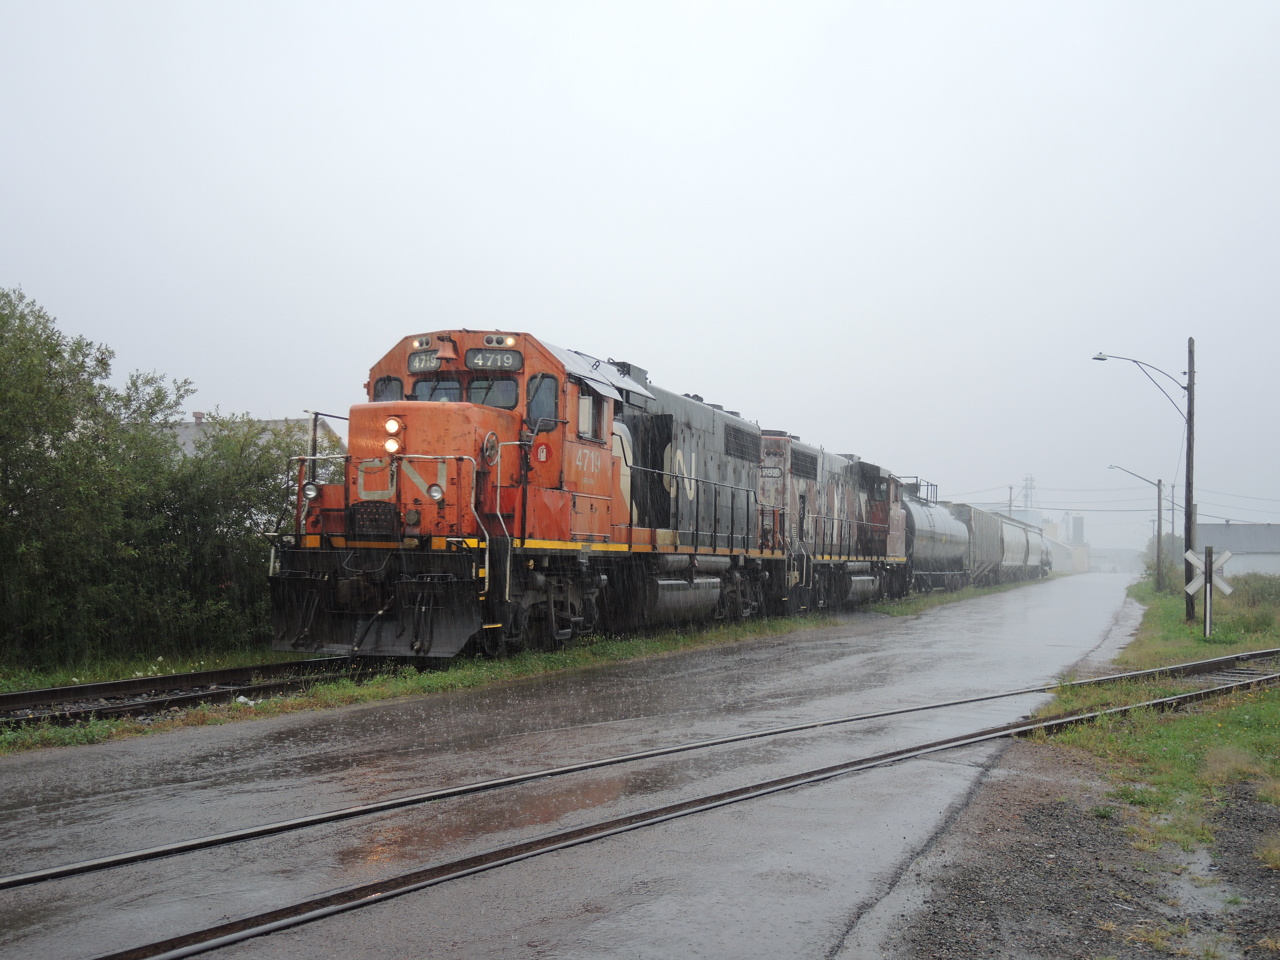 Captured in the poring rain, switching industry city of Moncton